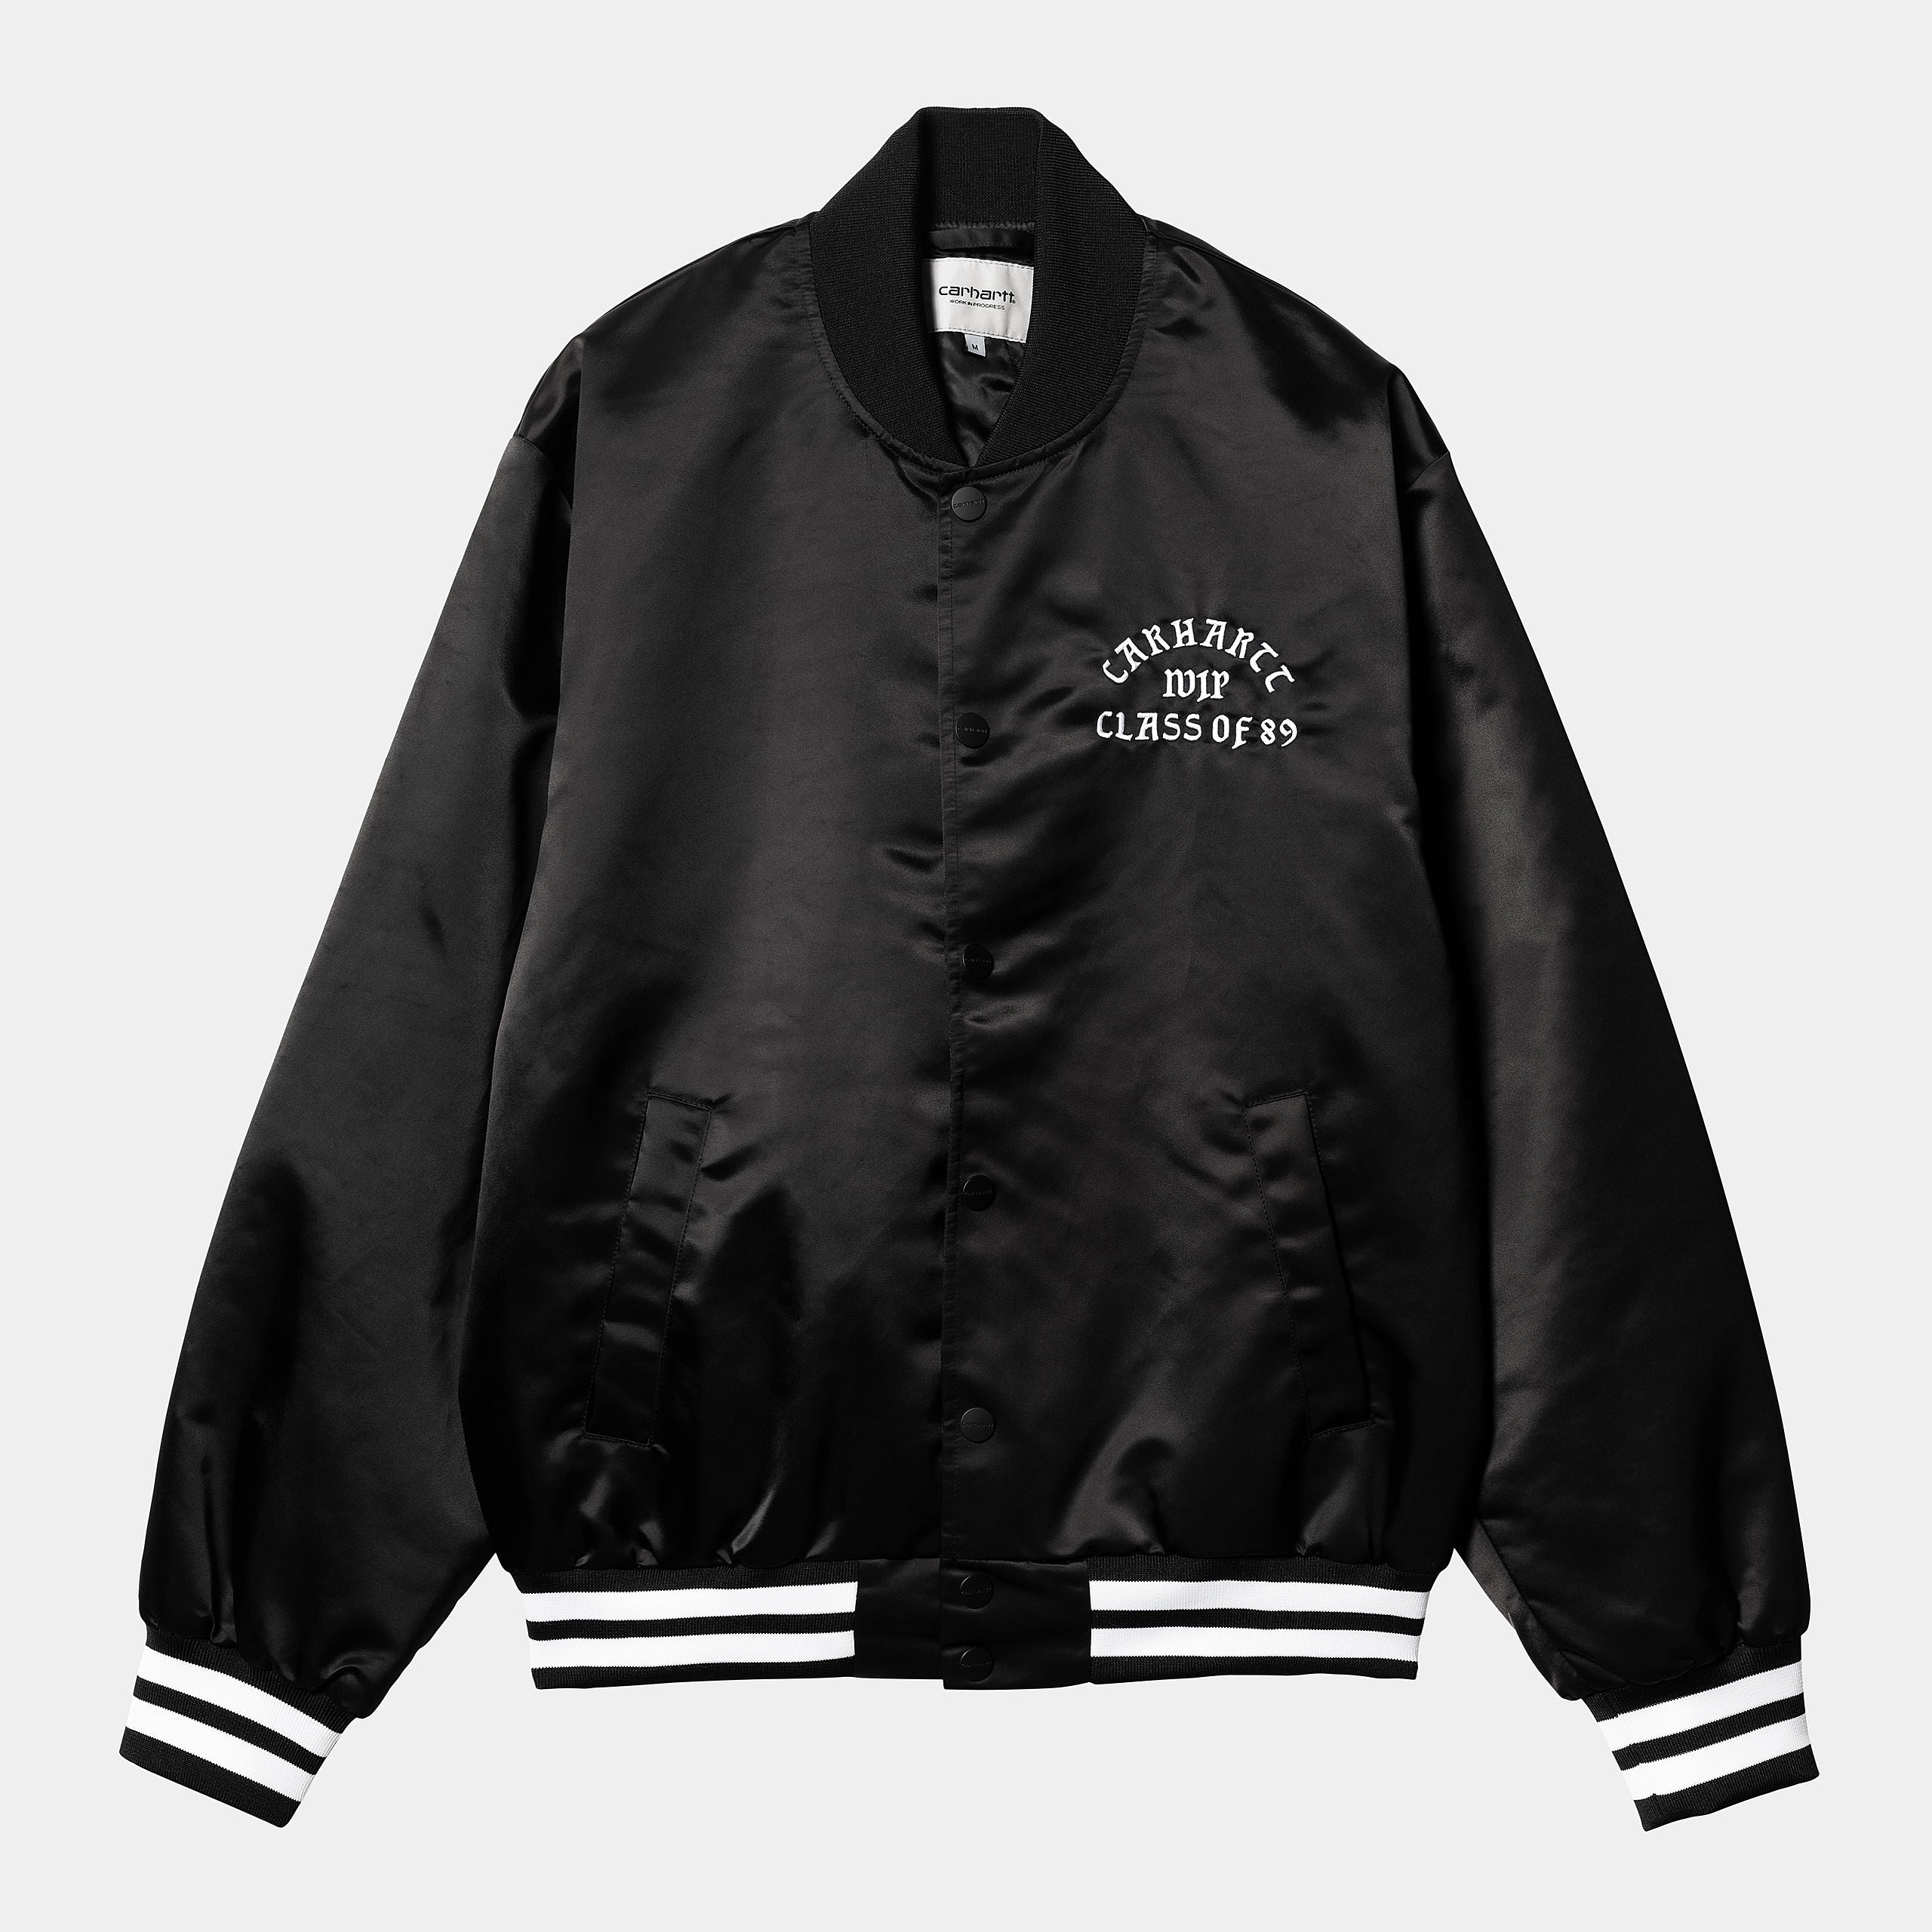 CLASS OF 89 BOMBER JACKET素材ナイロン